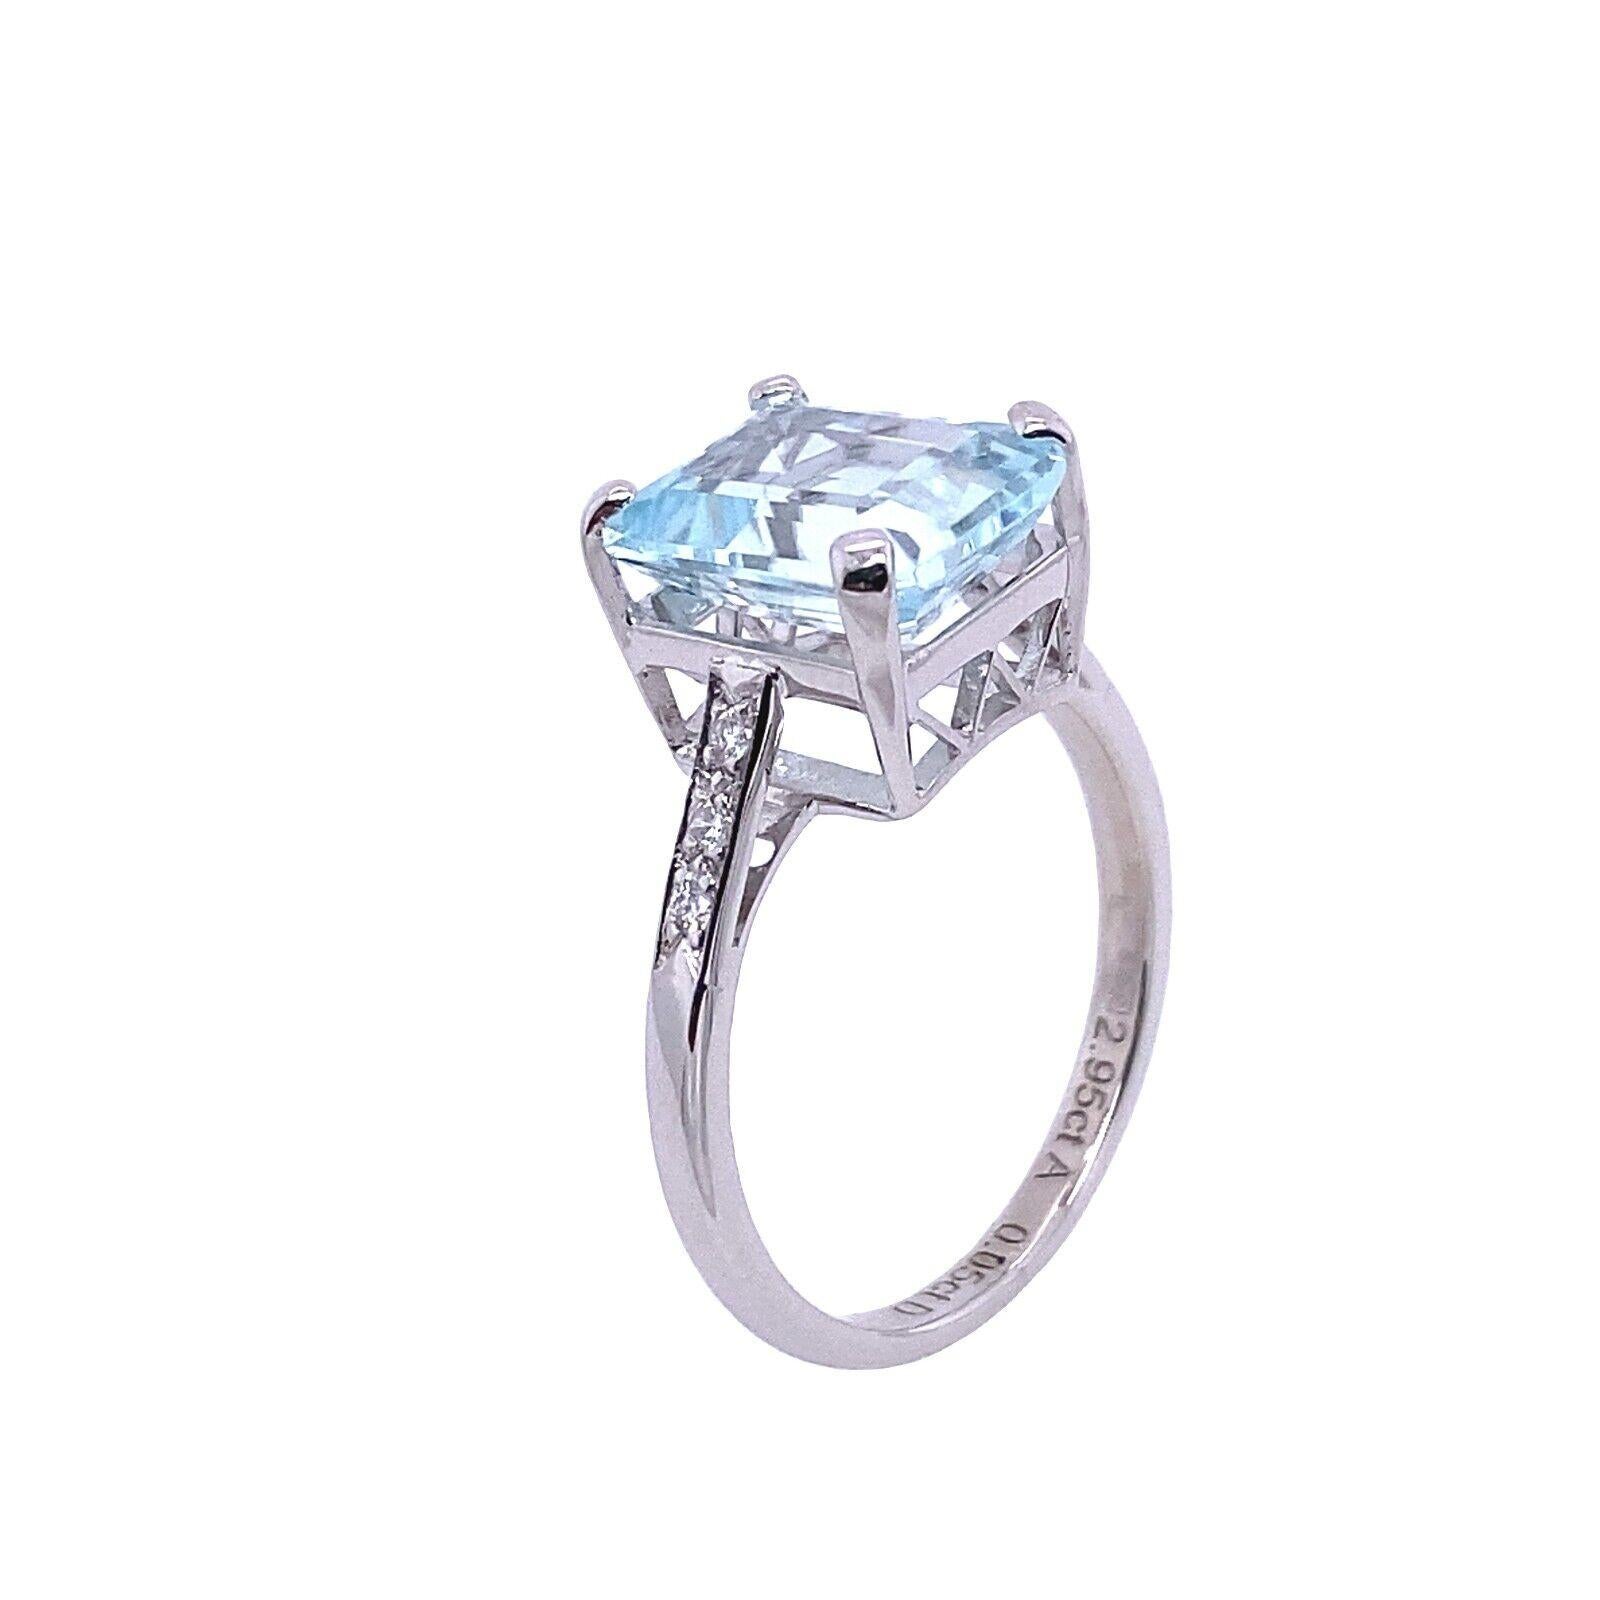 2.95ct Emerald Cut Aquamarine Set in 18ct White Gold Ring with Diamonds For Sale 1